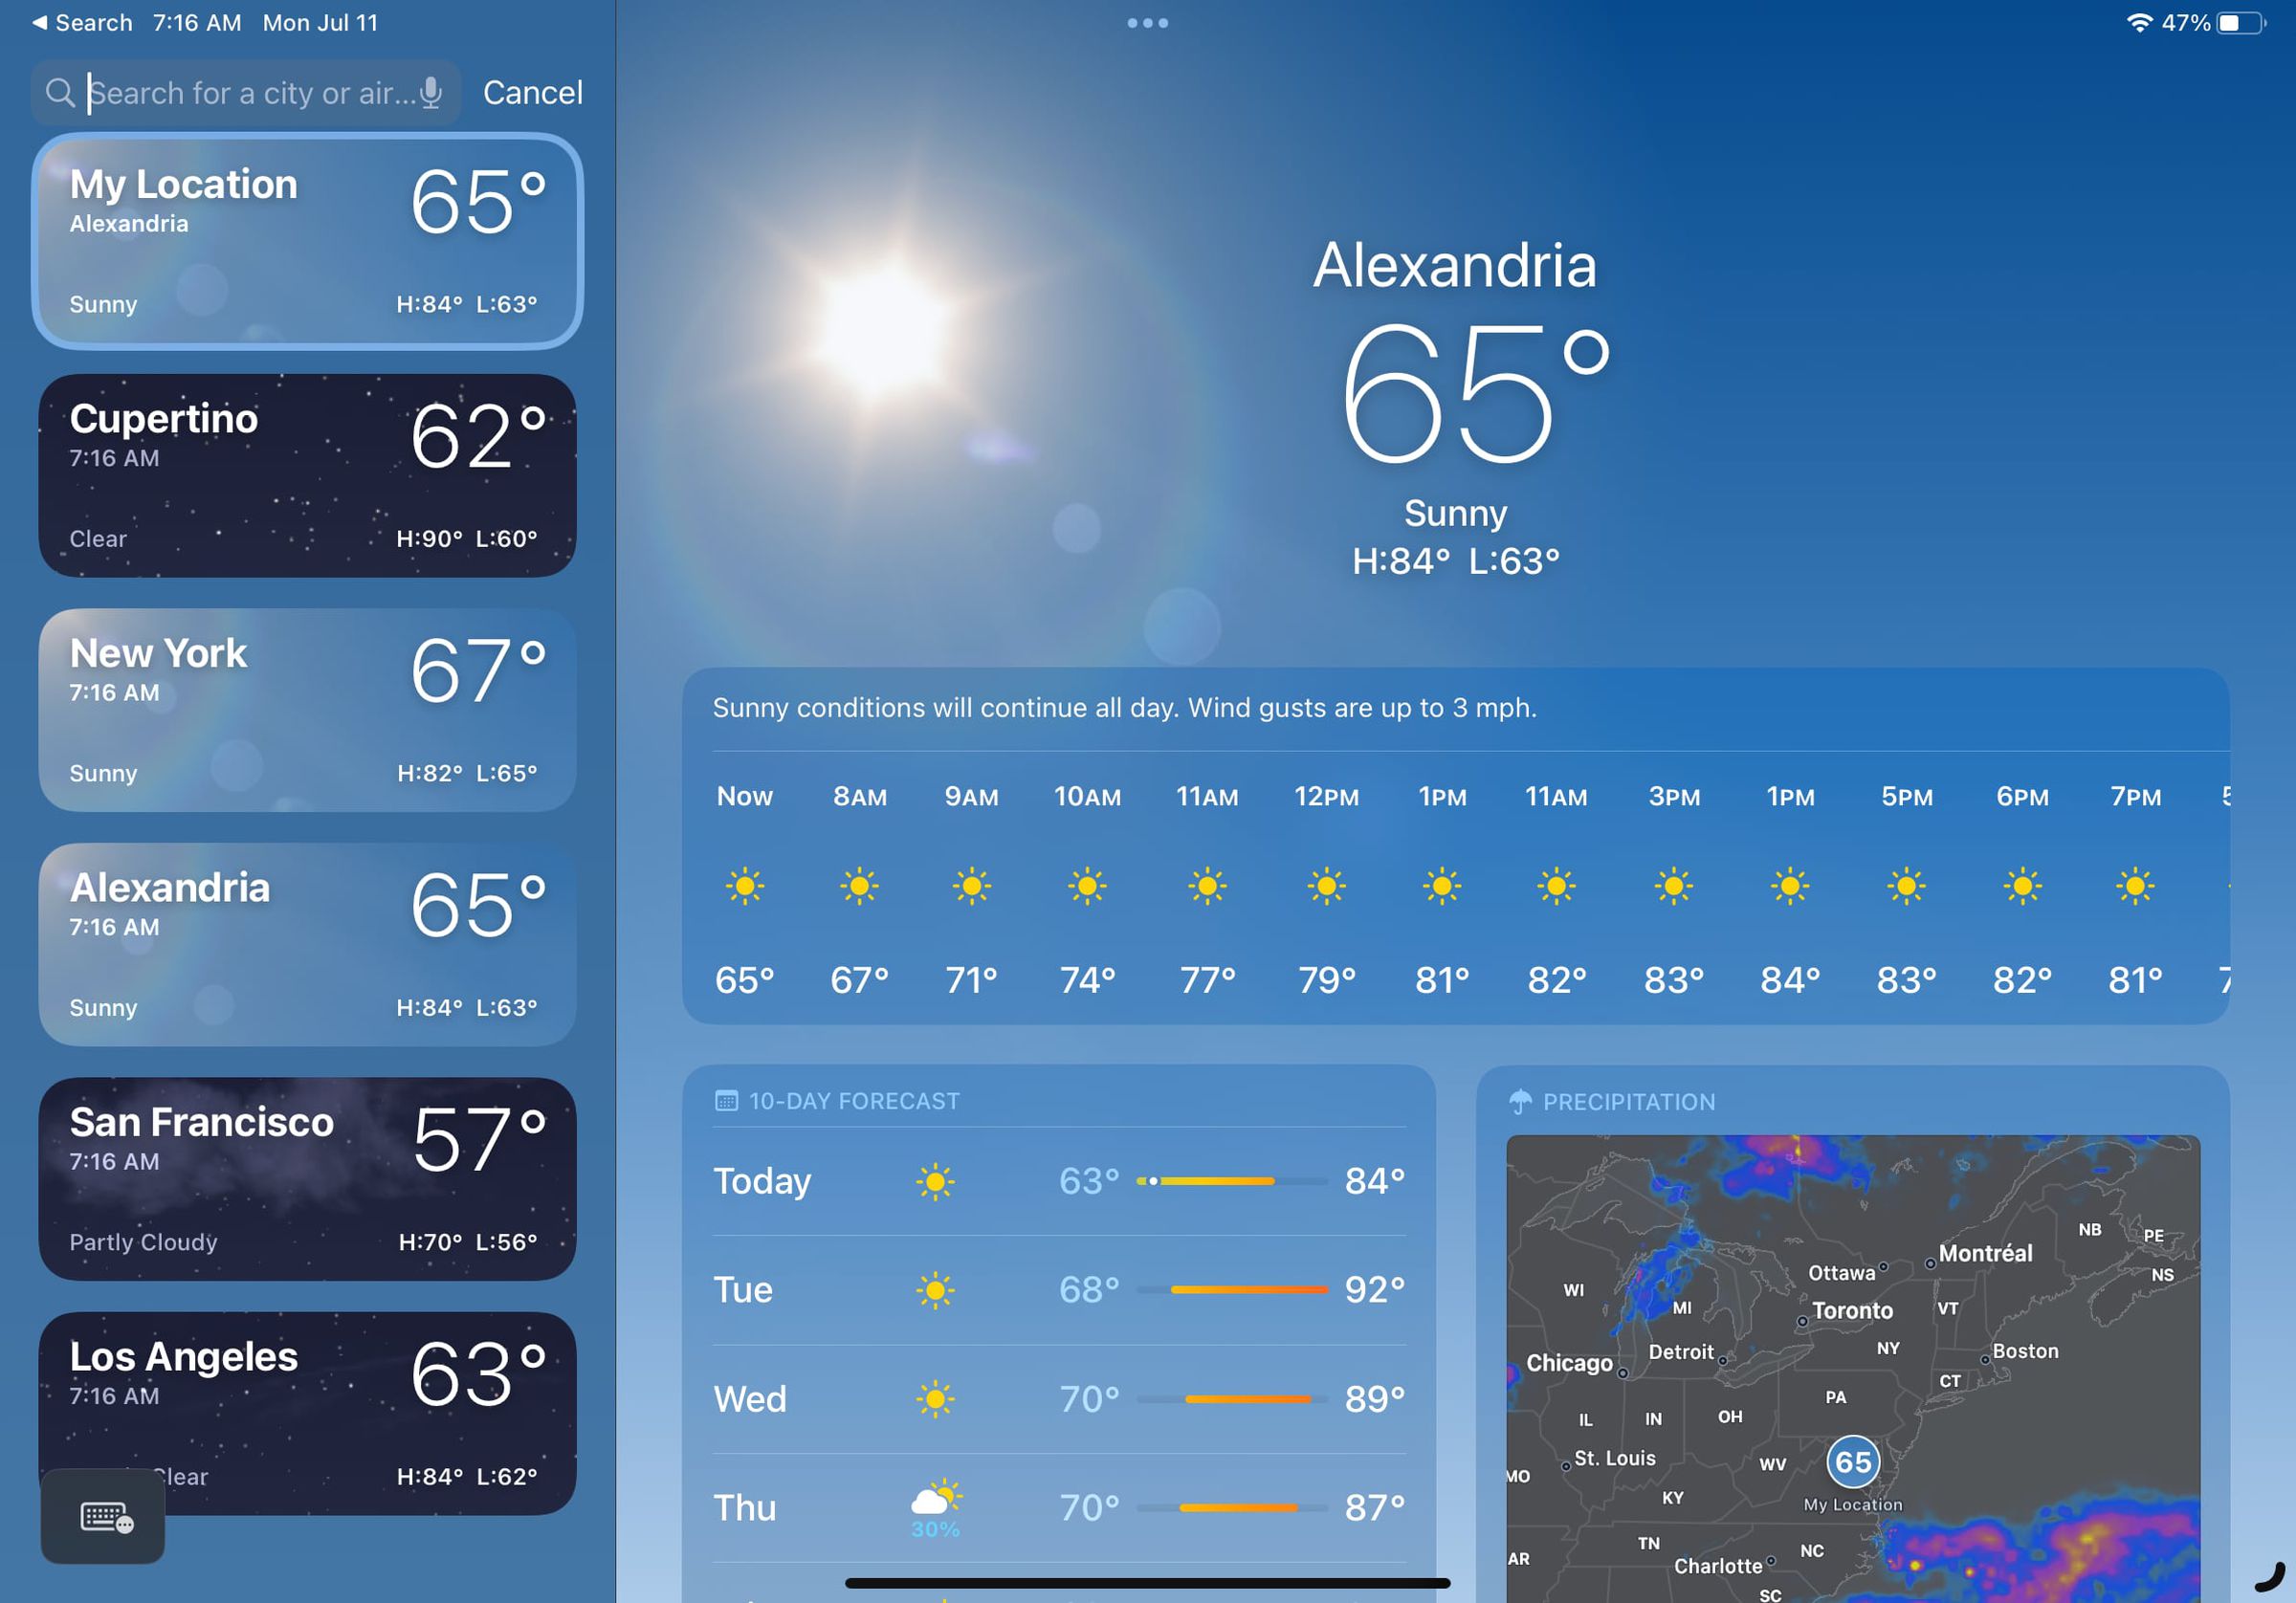 Look! A weather app on the iPad!